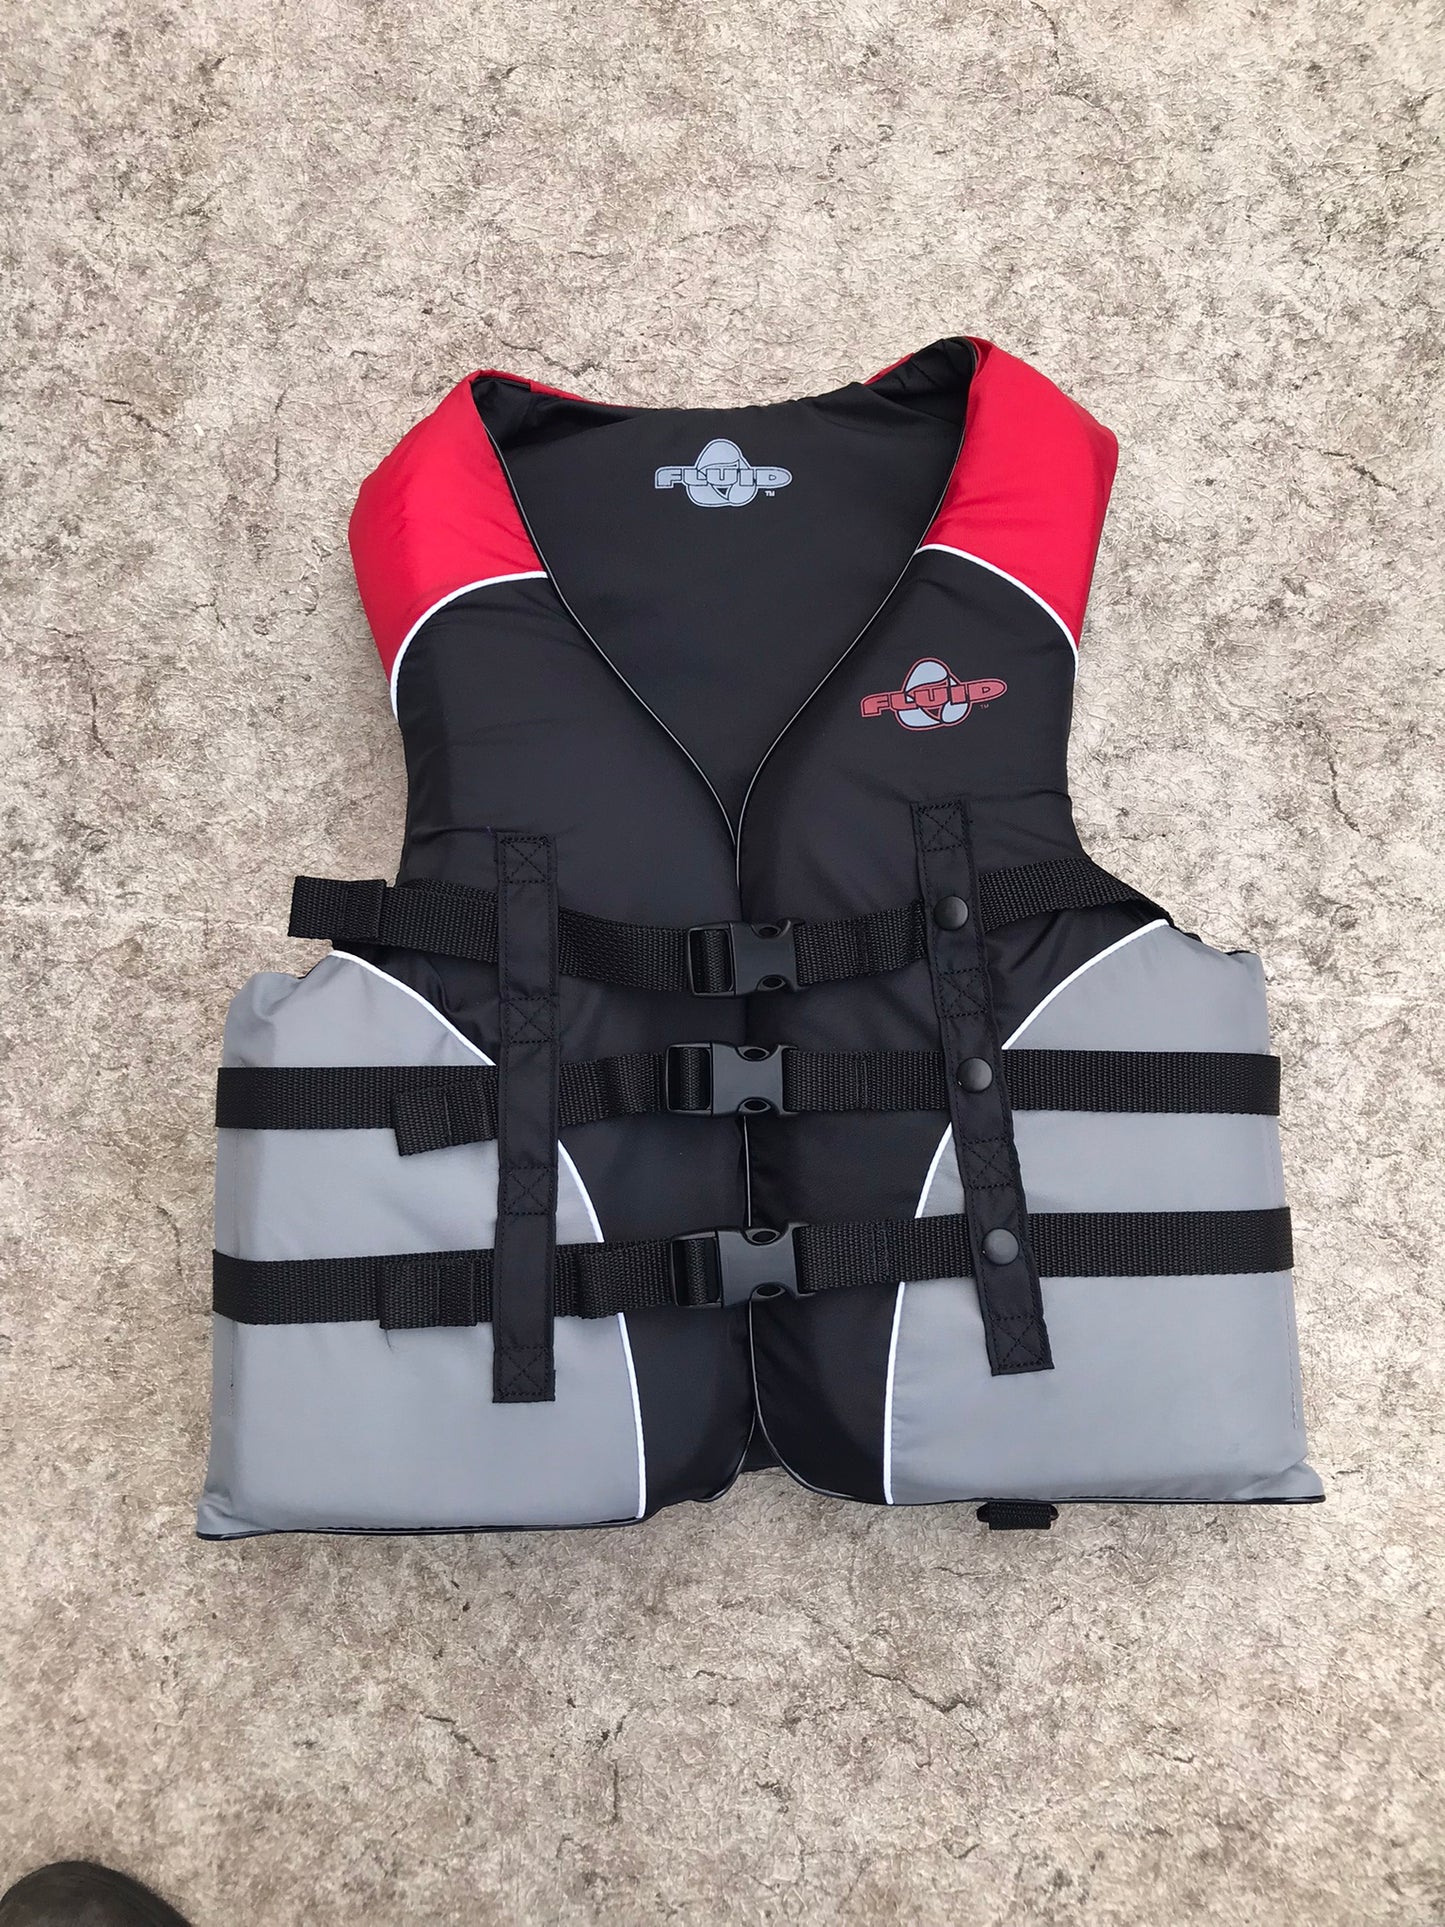 Life Jacket Adult Small  Fluid Black Red New Demo Model